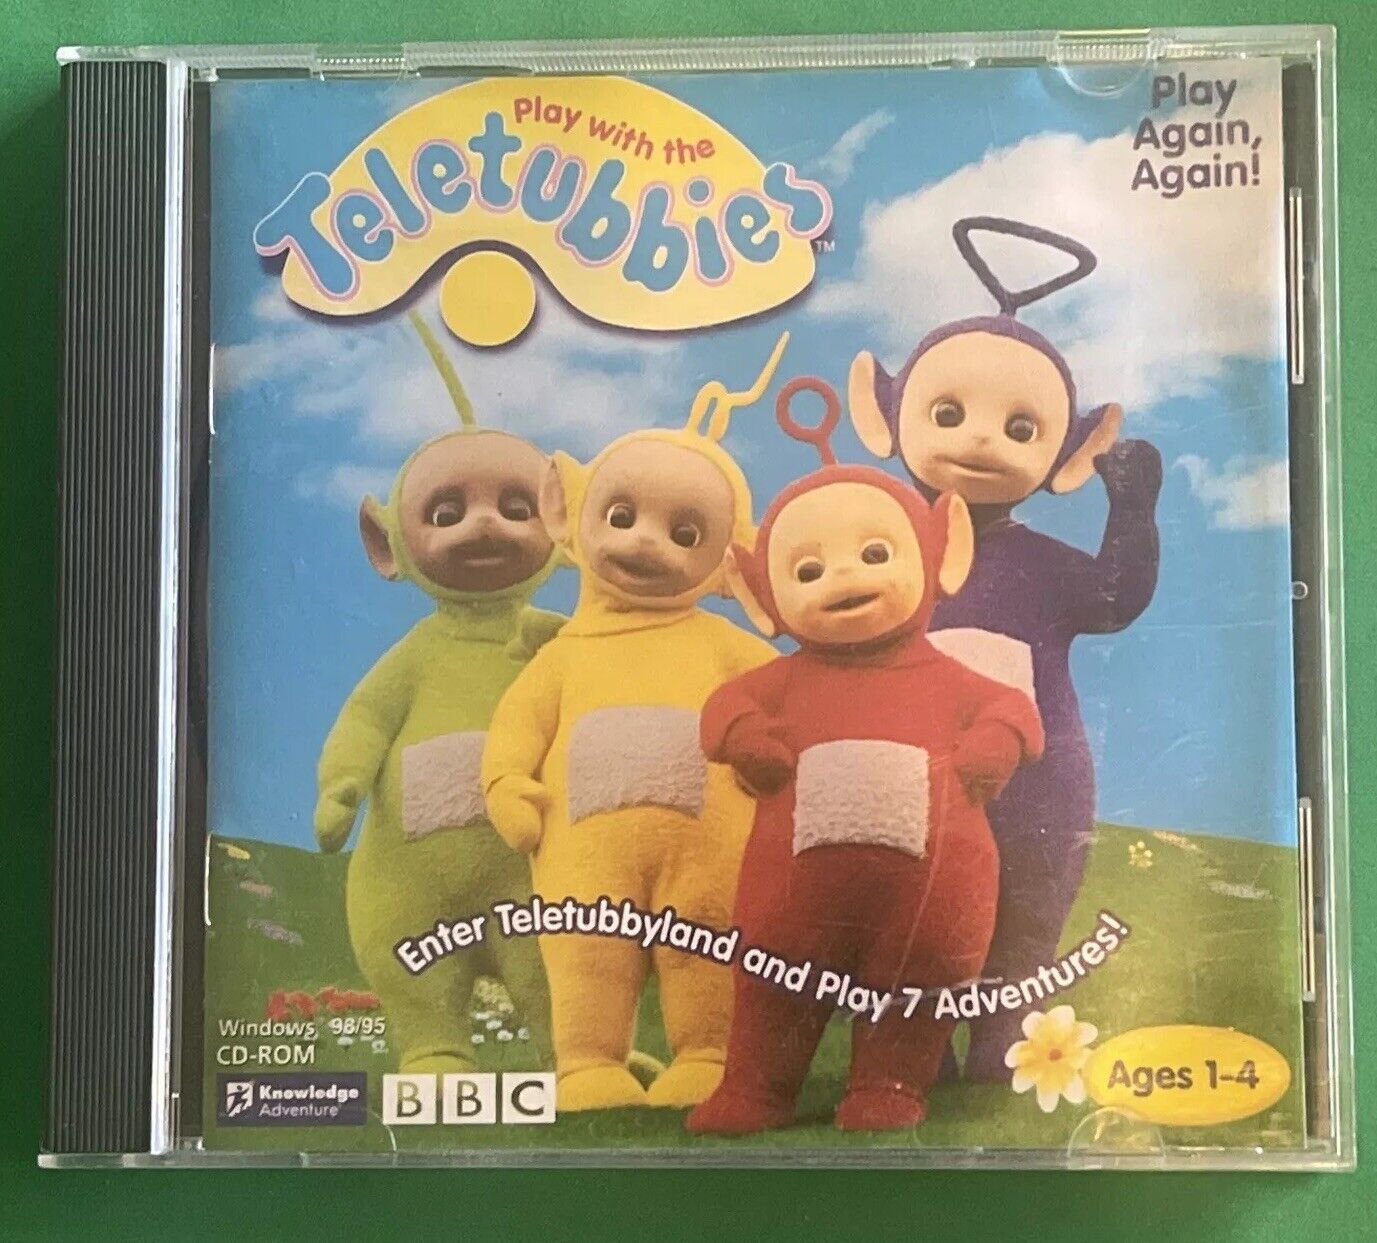 PLAY WITH THE TELETUBBIES BBC Vintage Software Game Windows PC CD-ROM Disc 1998